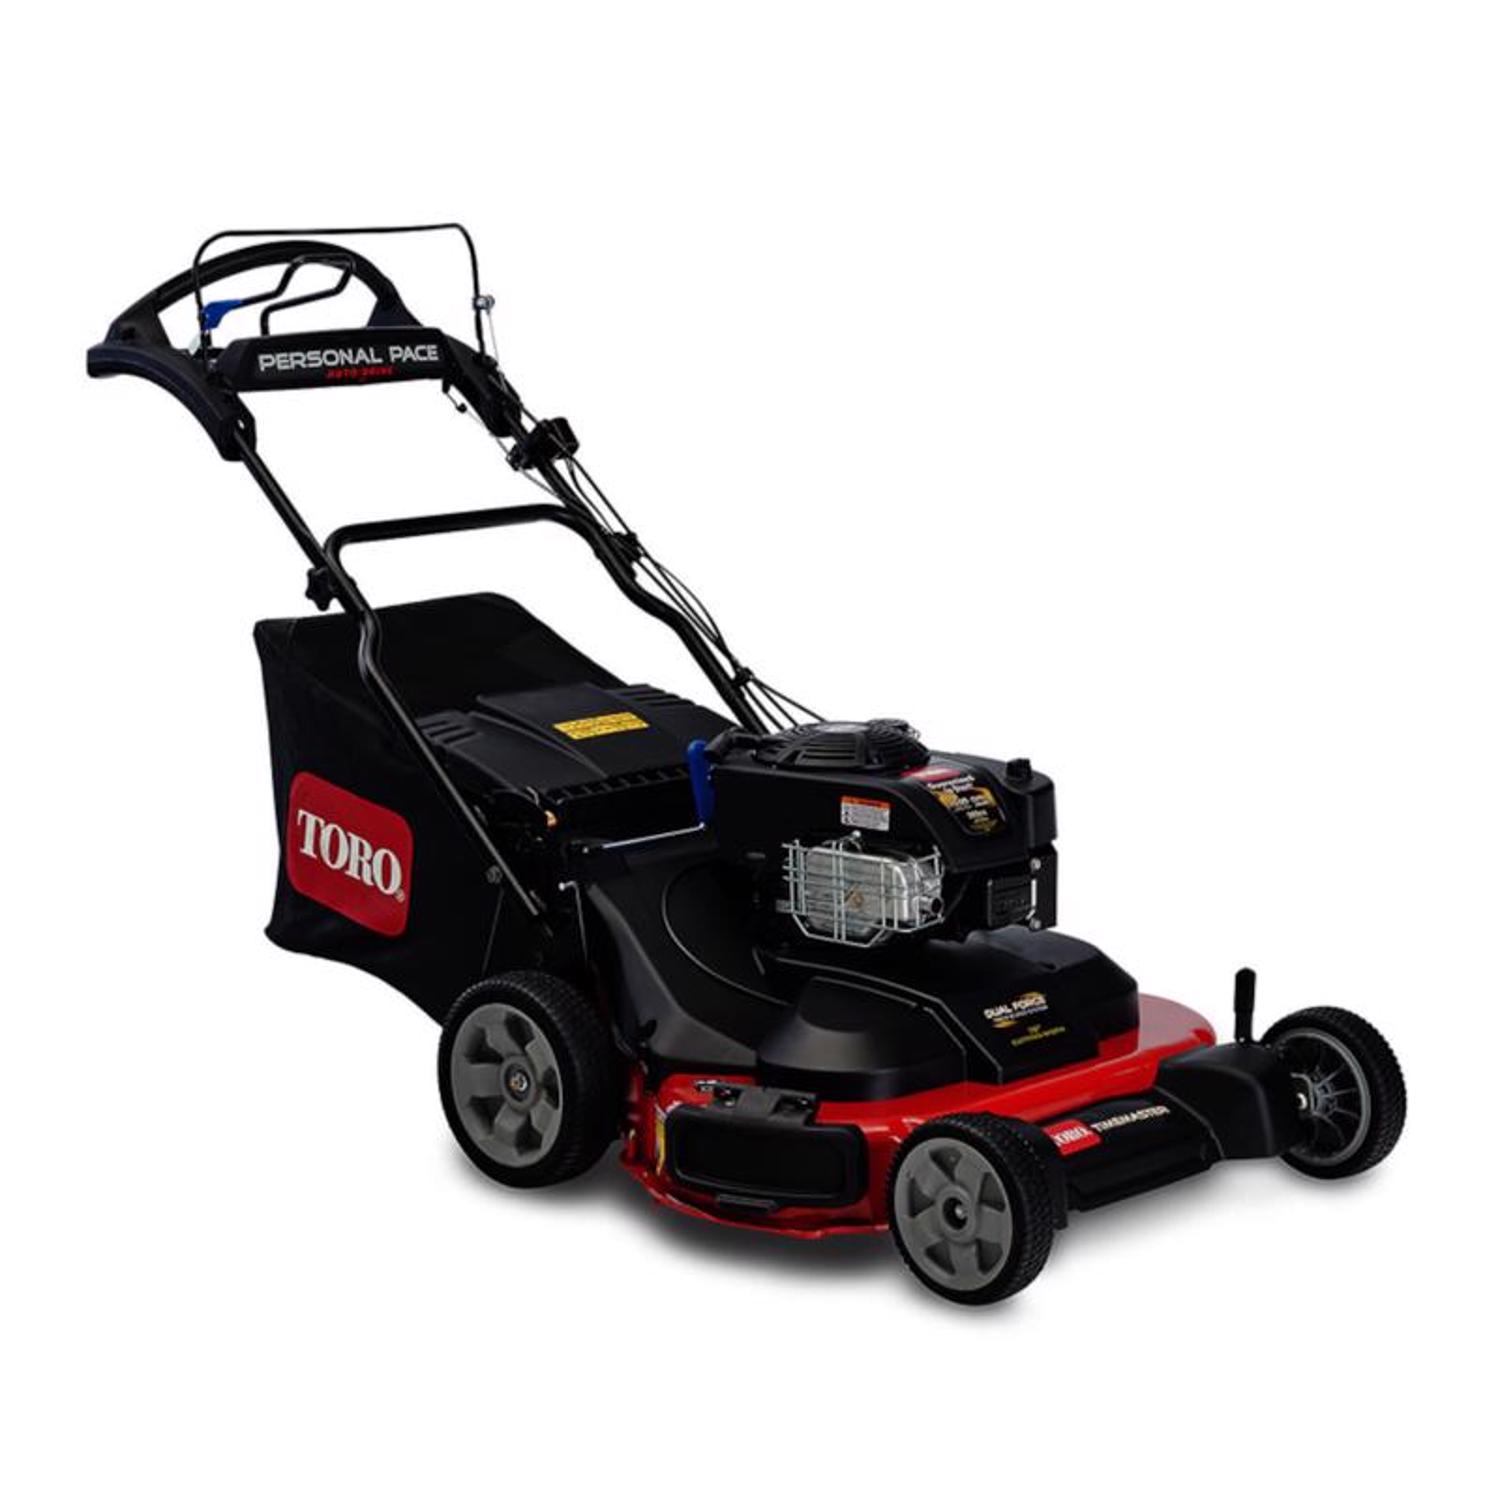 Toro Personal Pace TimeMaster Gas Lawn Mower - Ace Hardware